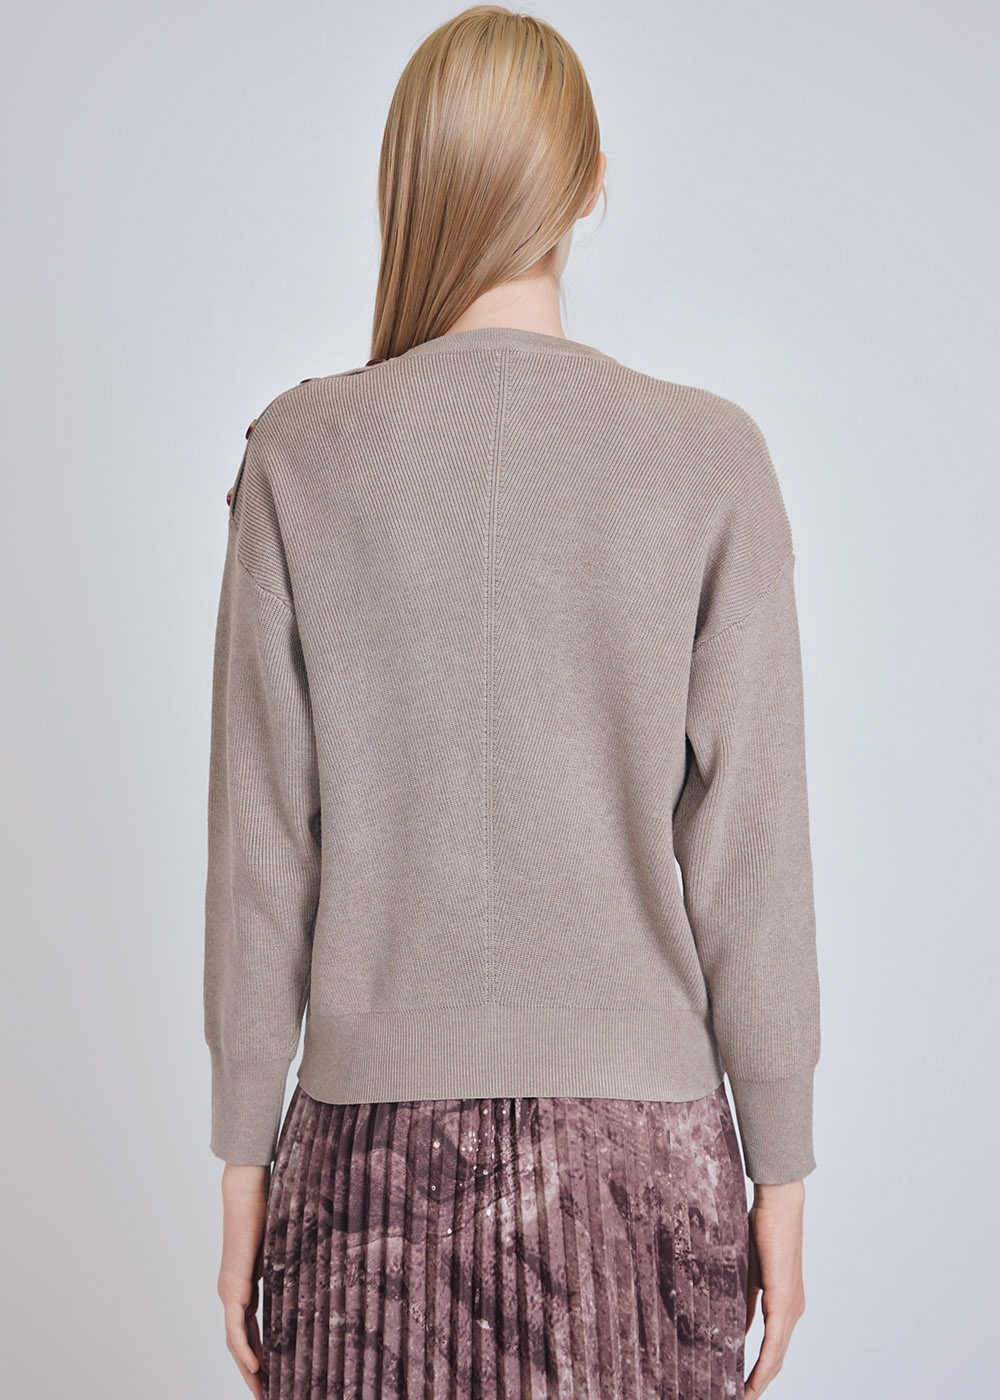 Soft Hue Beige Sweater: Knit & Button-Decorated Sleeves